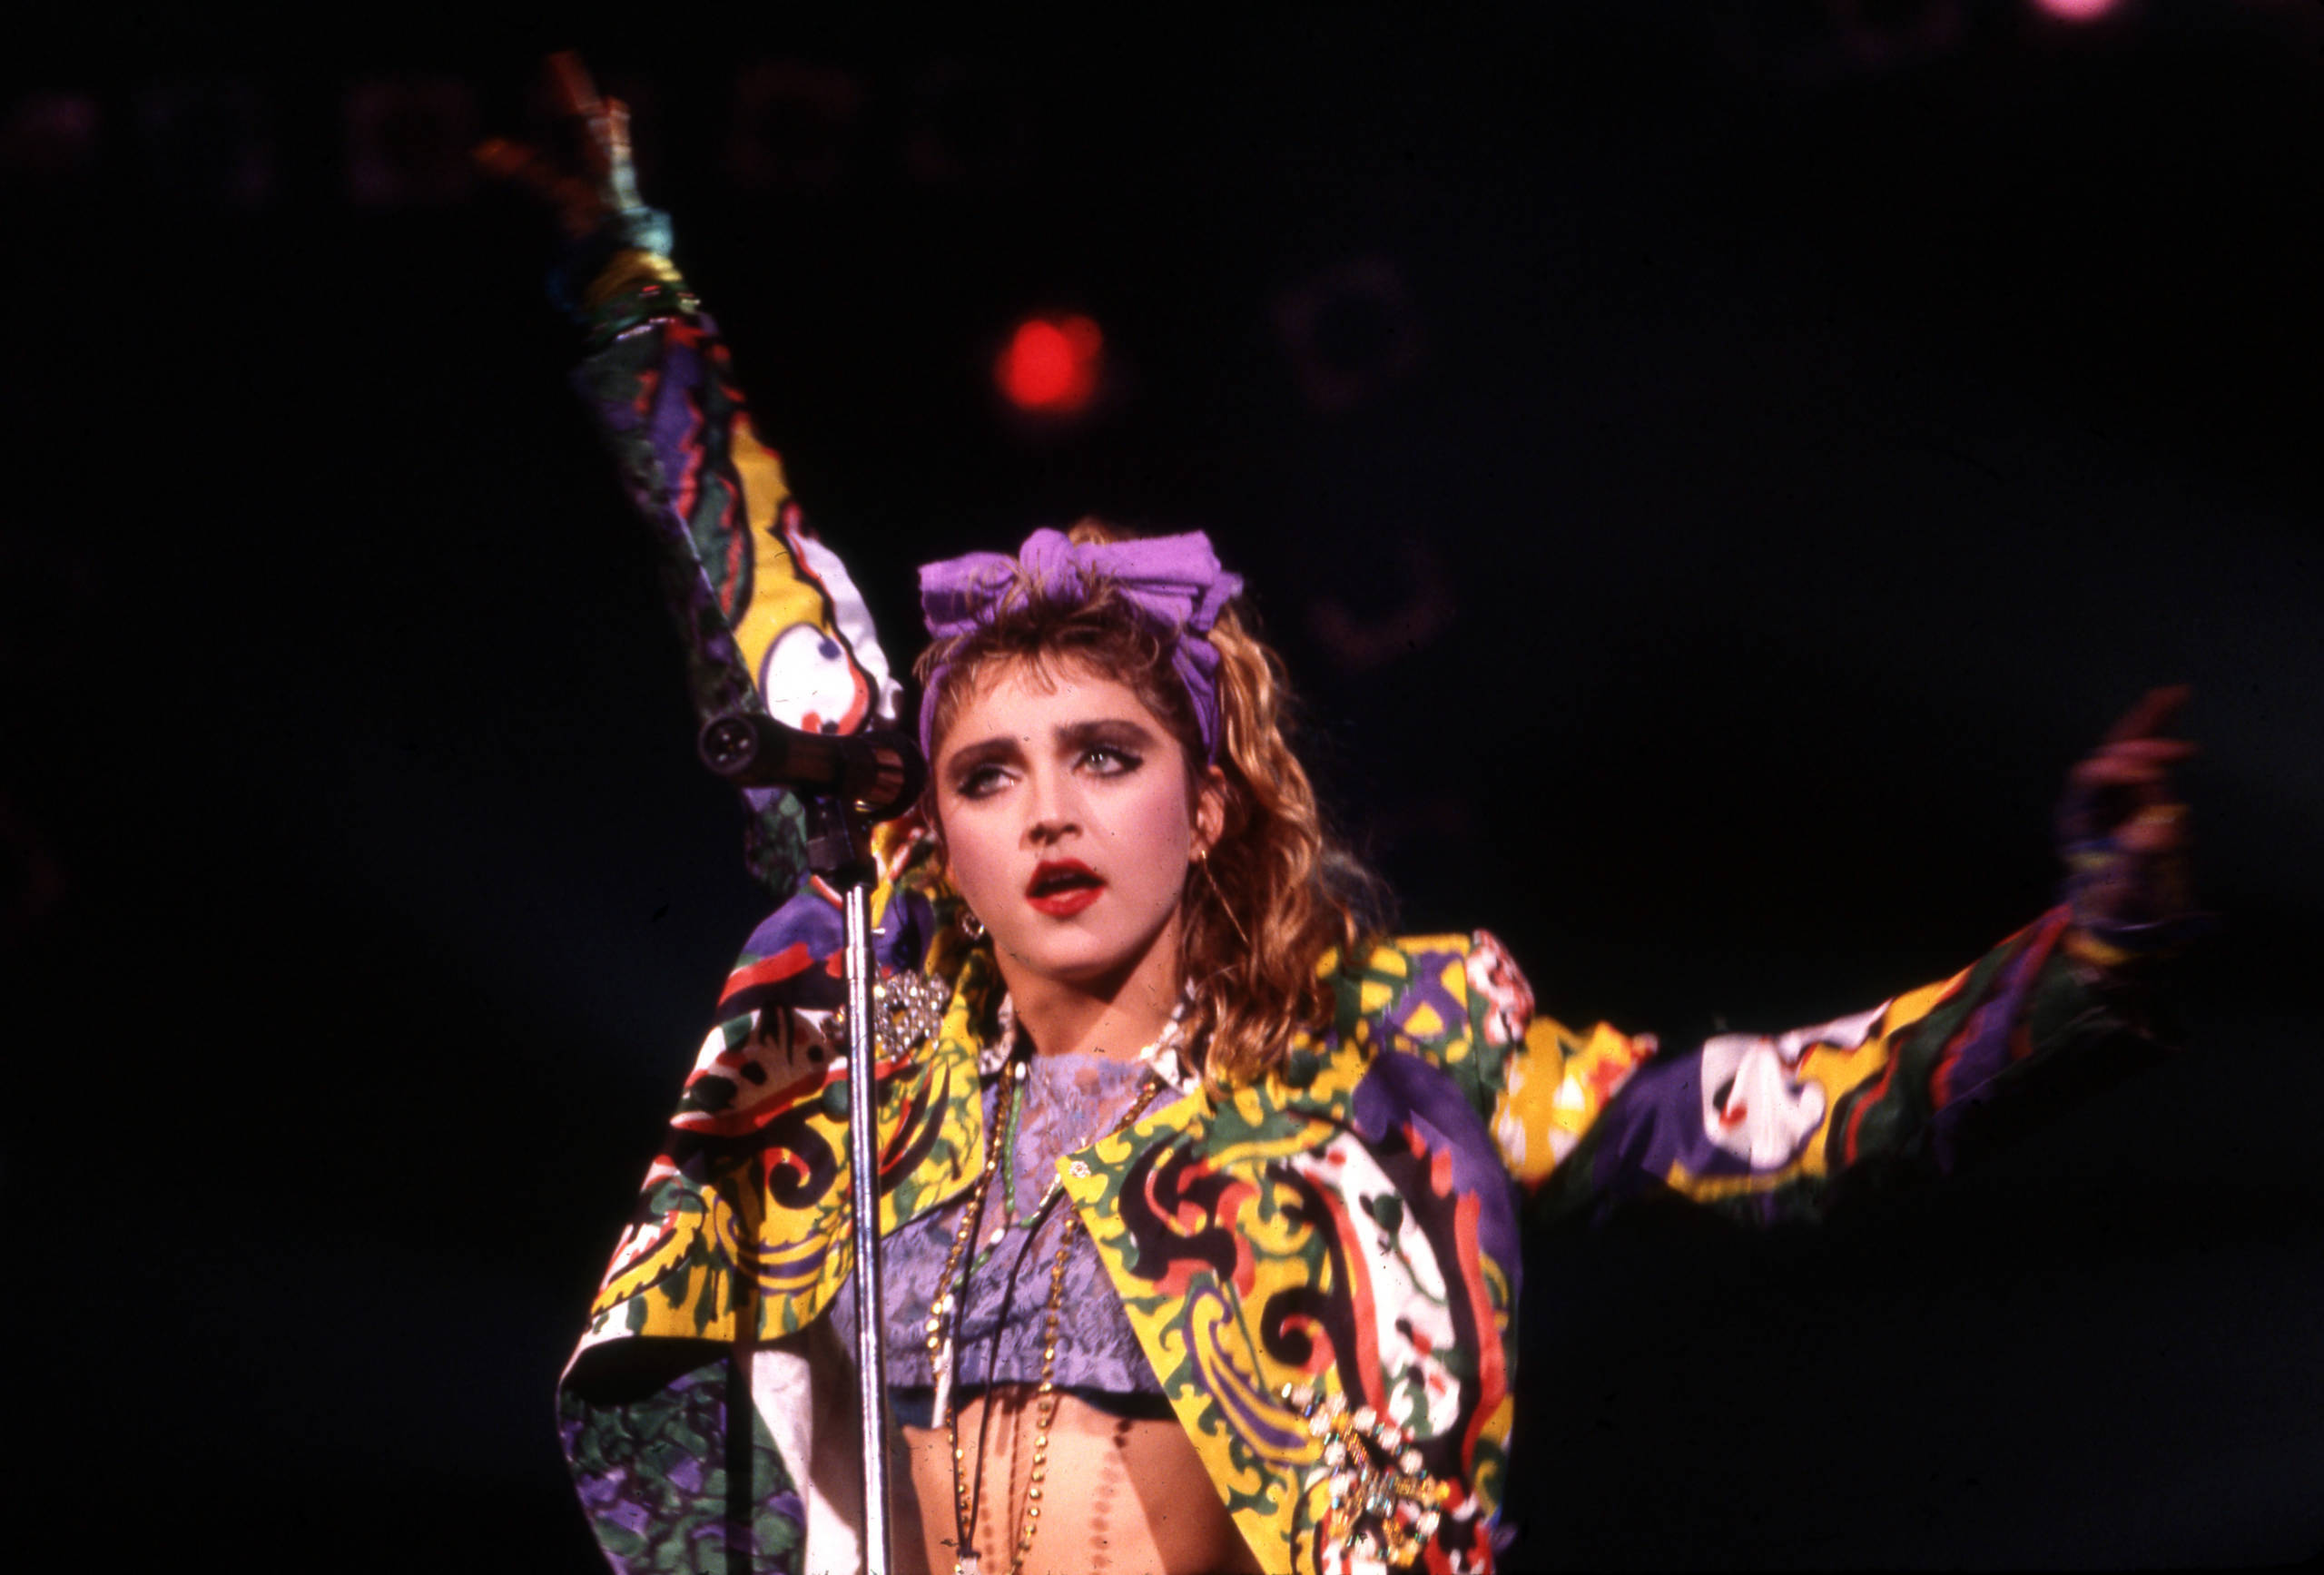 Madonna bei ihrer „Virgin Tour" am 25. Mai 1985 in der Cobo Arena in Detroit, Michigan. (Foto: Ross Marino/Icon and Image/Getty Images)